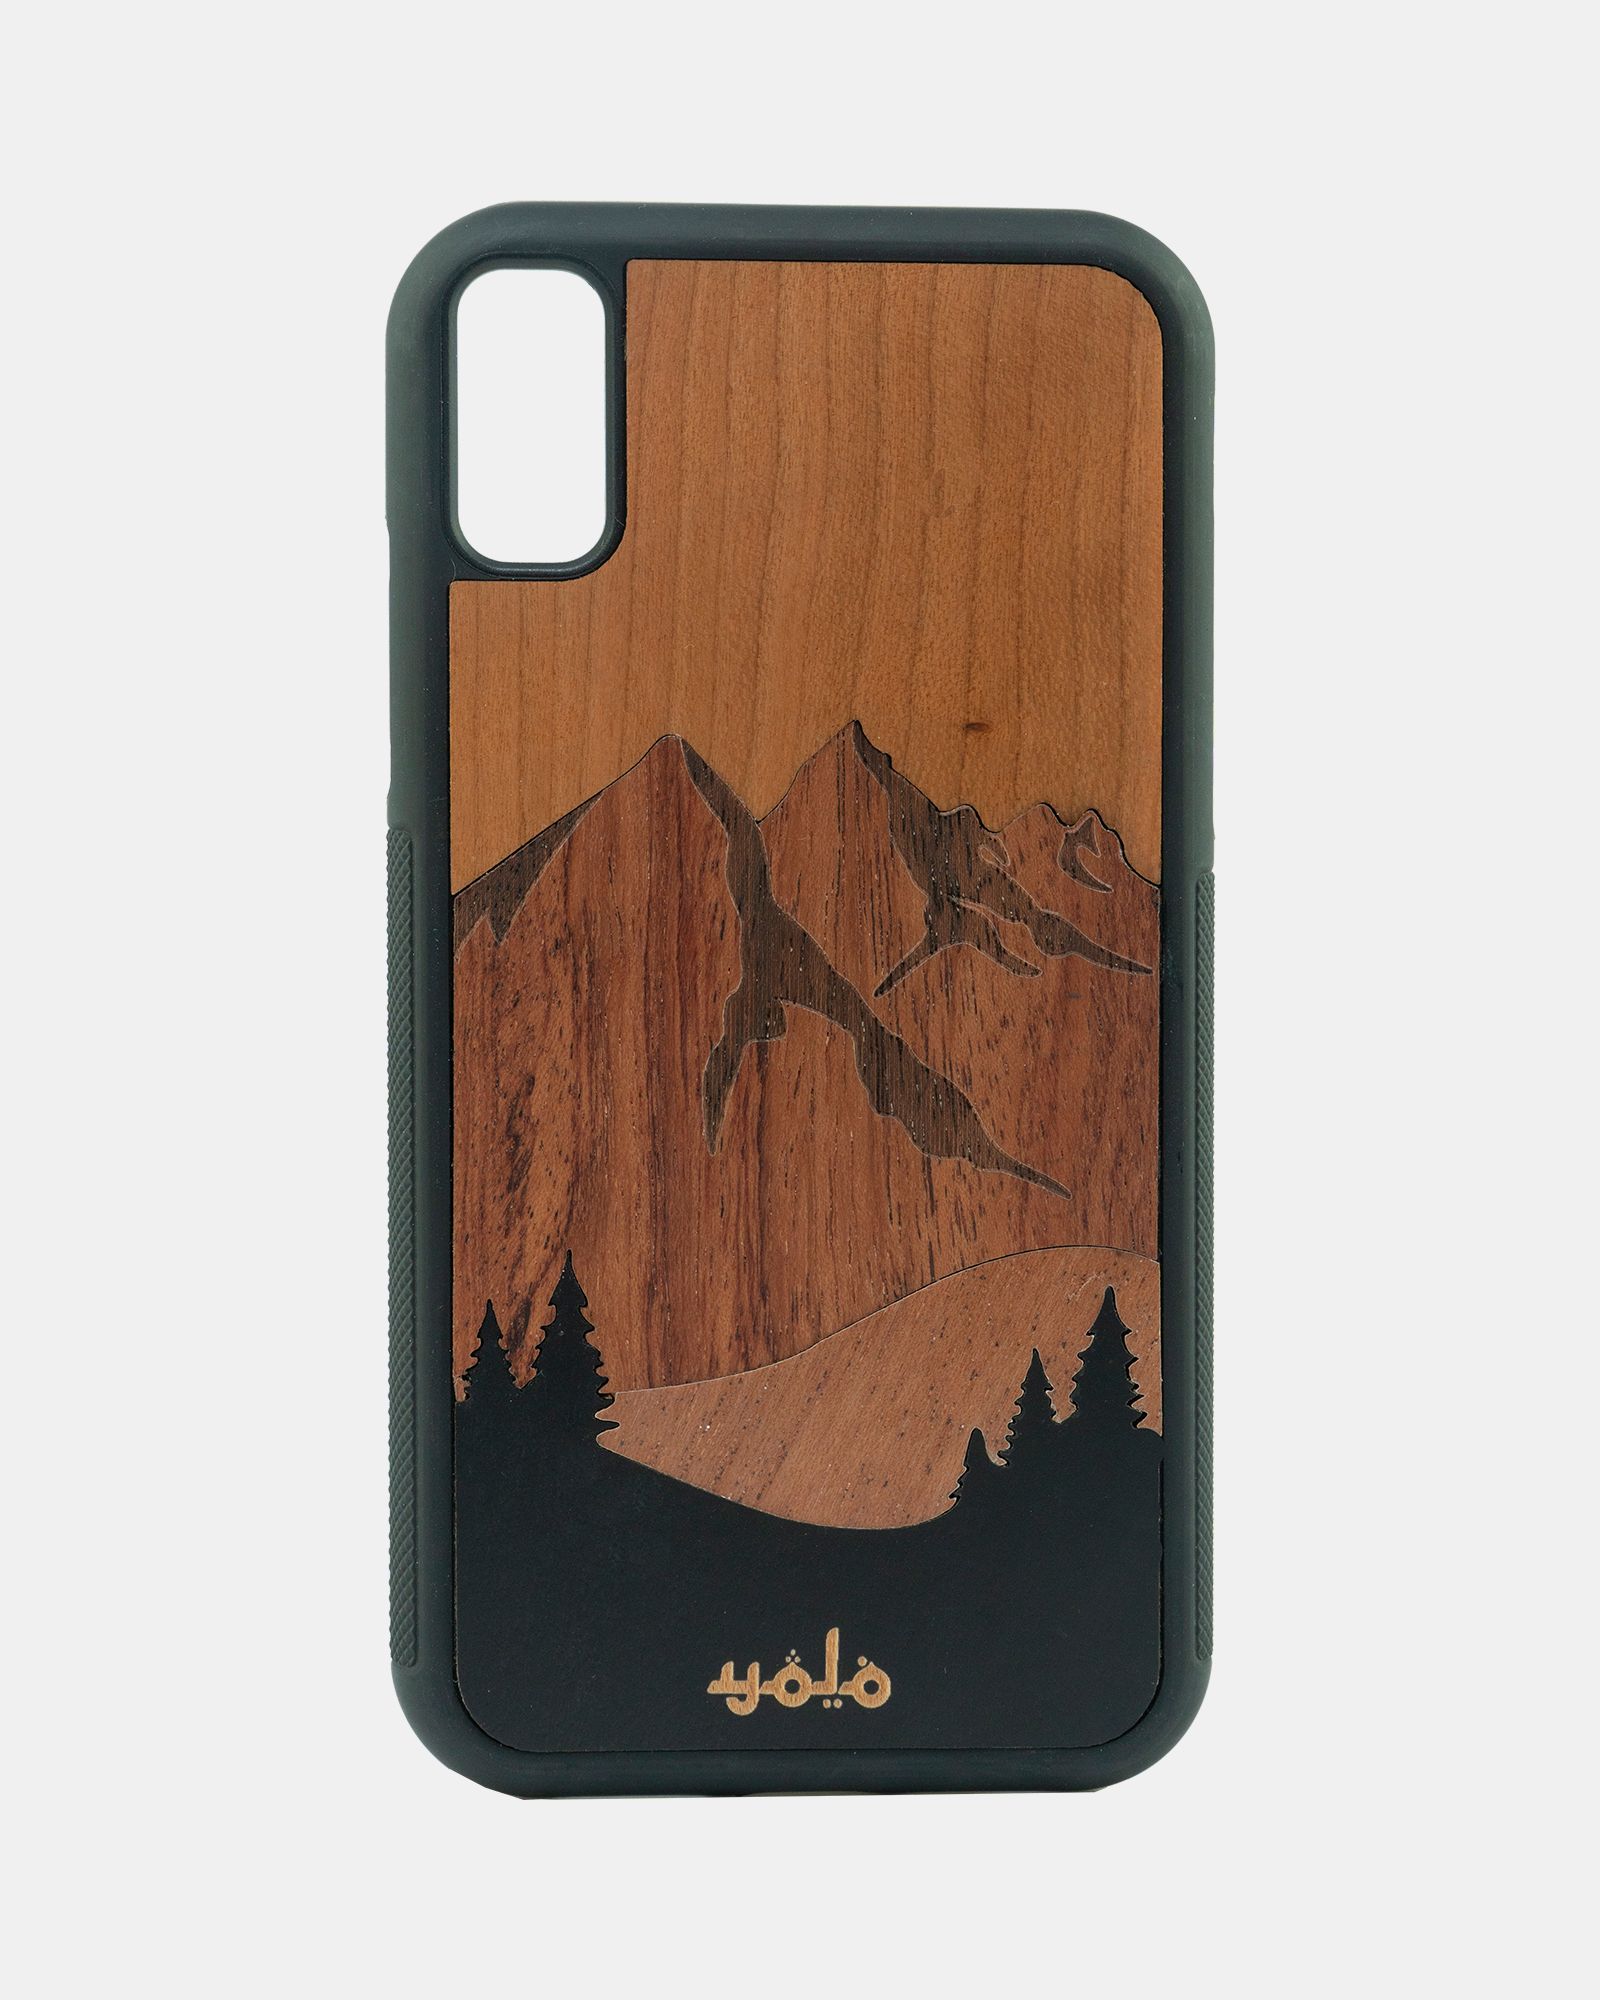  Silicon Wooden Iphone XS Max Case 